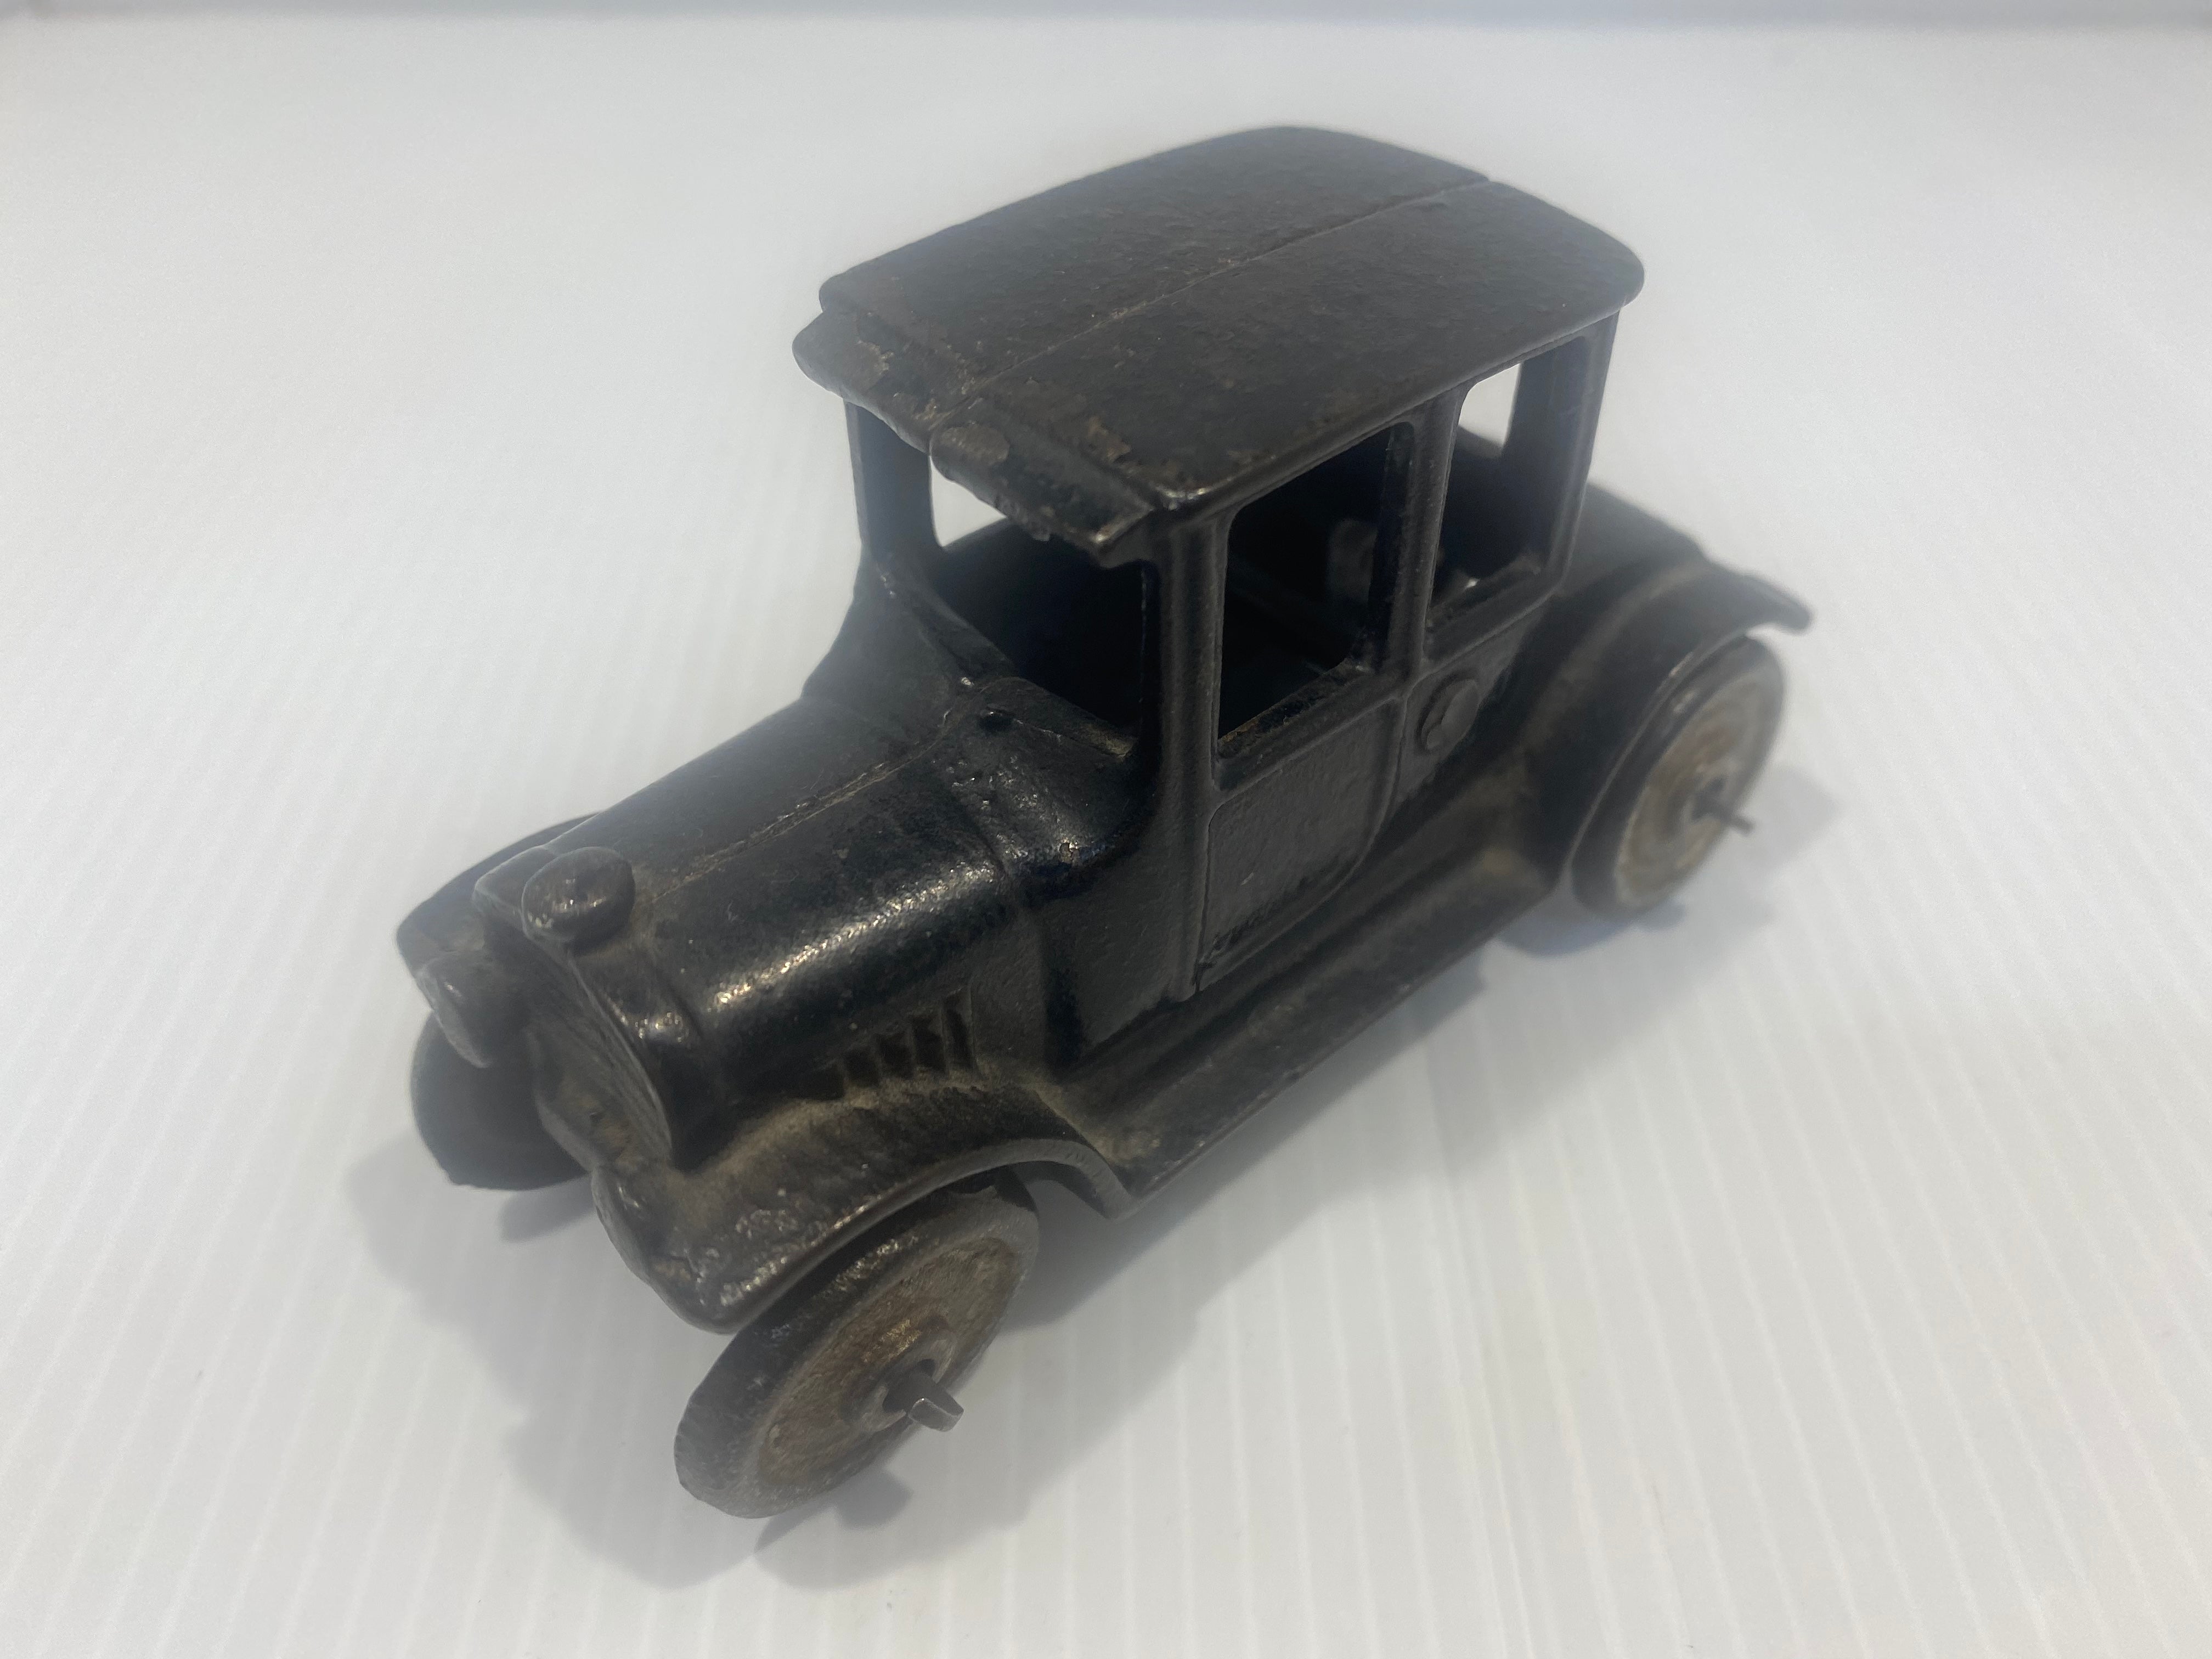 Arcade Cast iron Ford Model T - 1920s